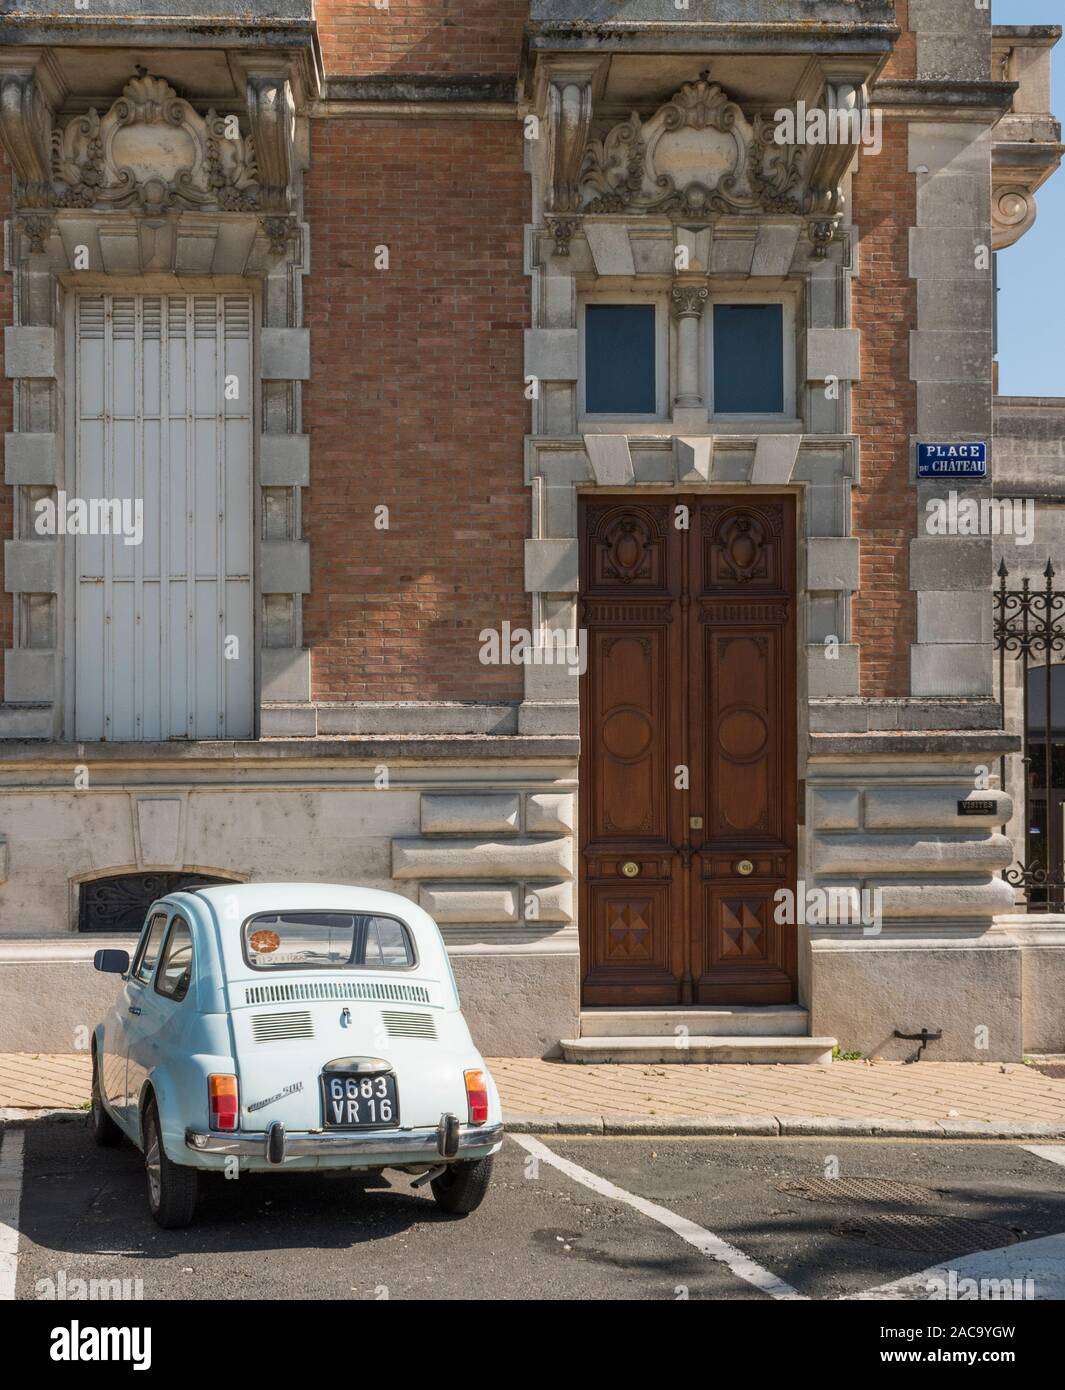 Fiat 500 parked outside the grand building in Jarnac, Charente, France Stock Photo